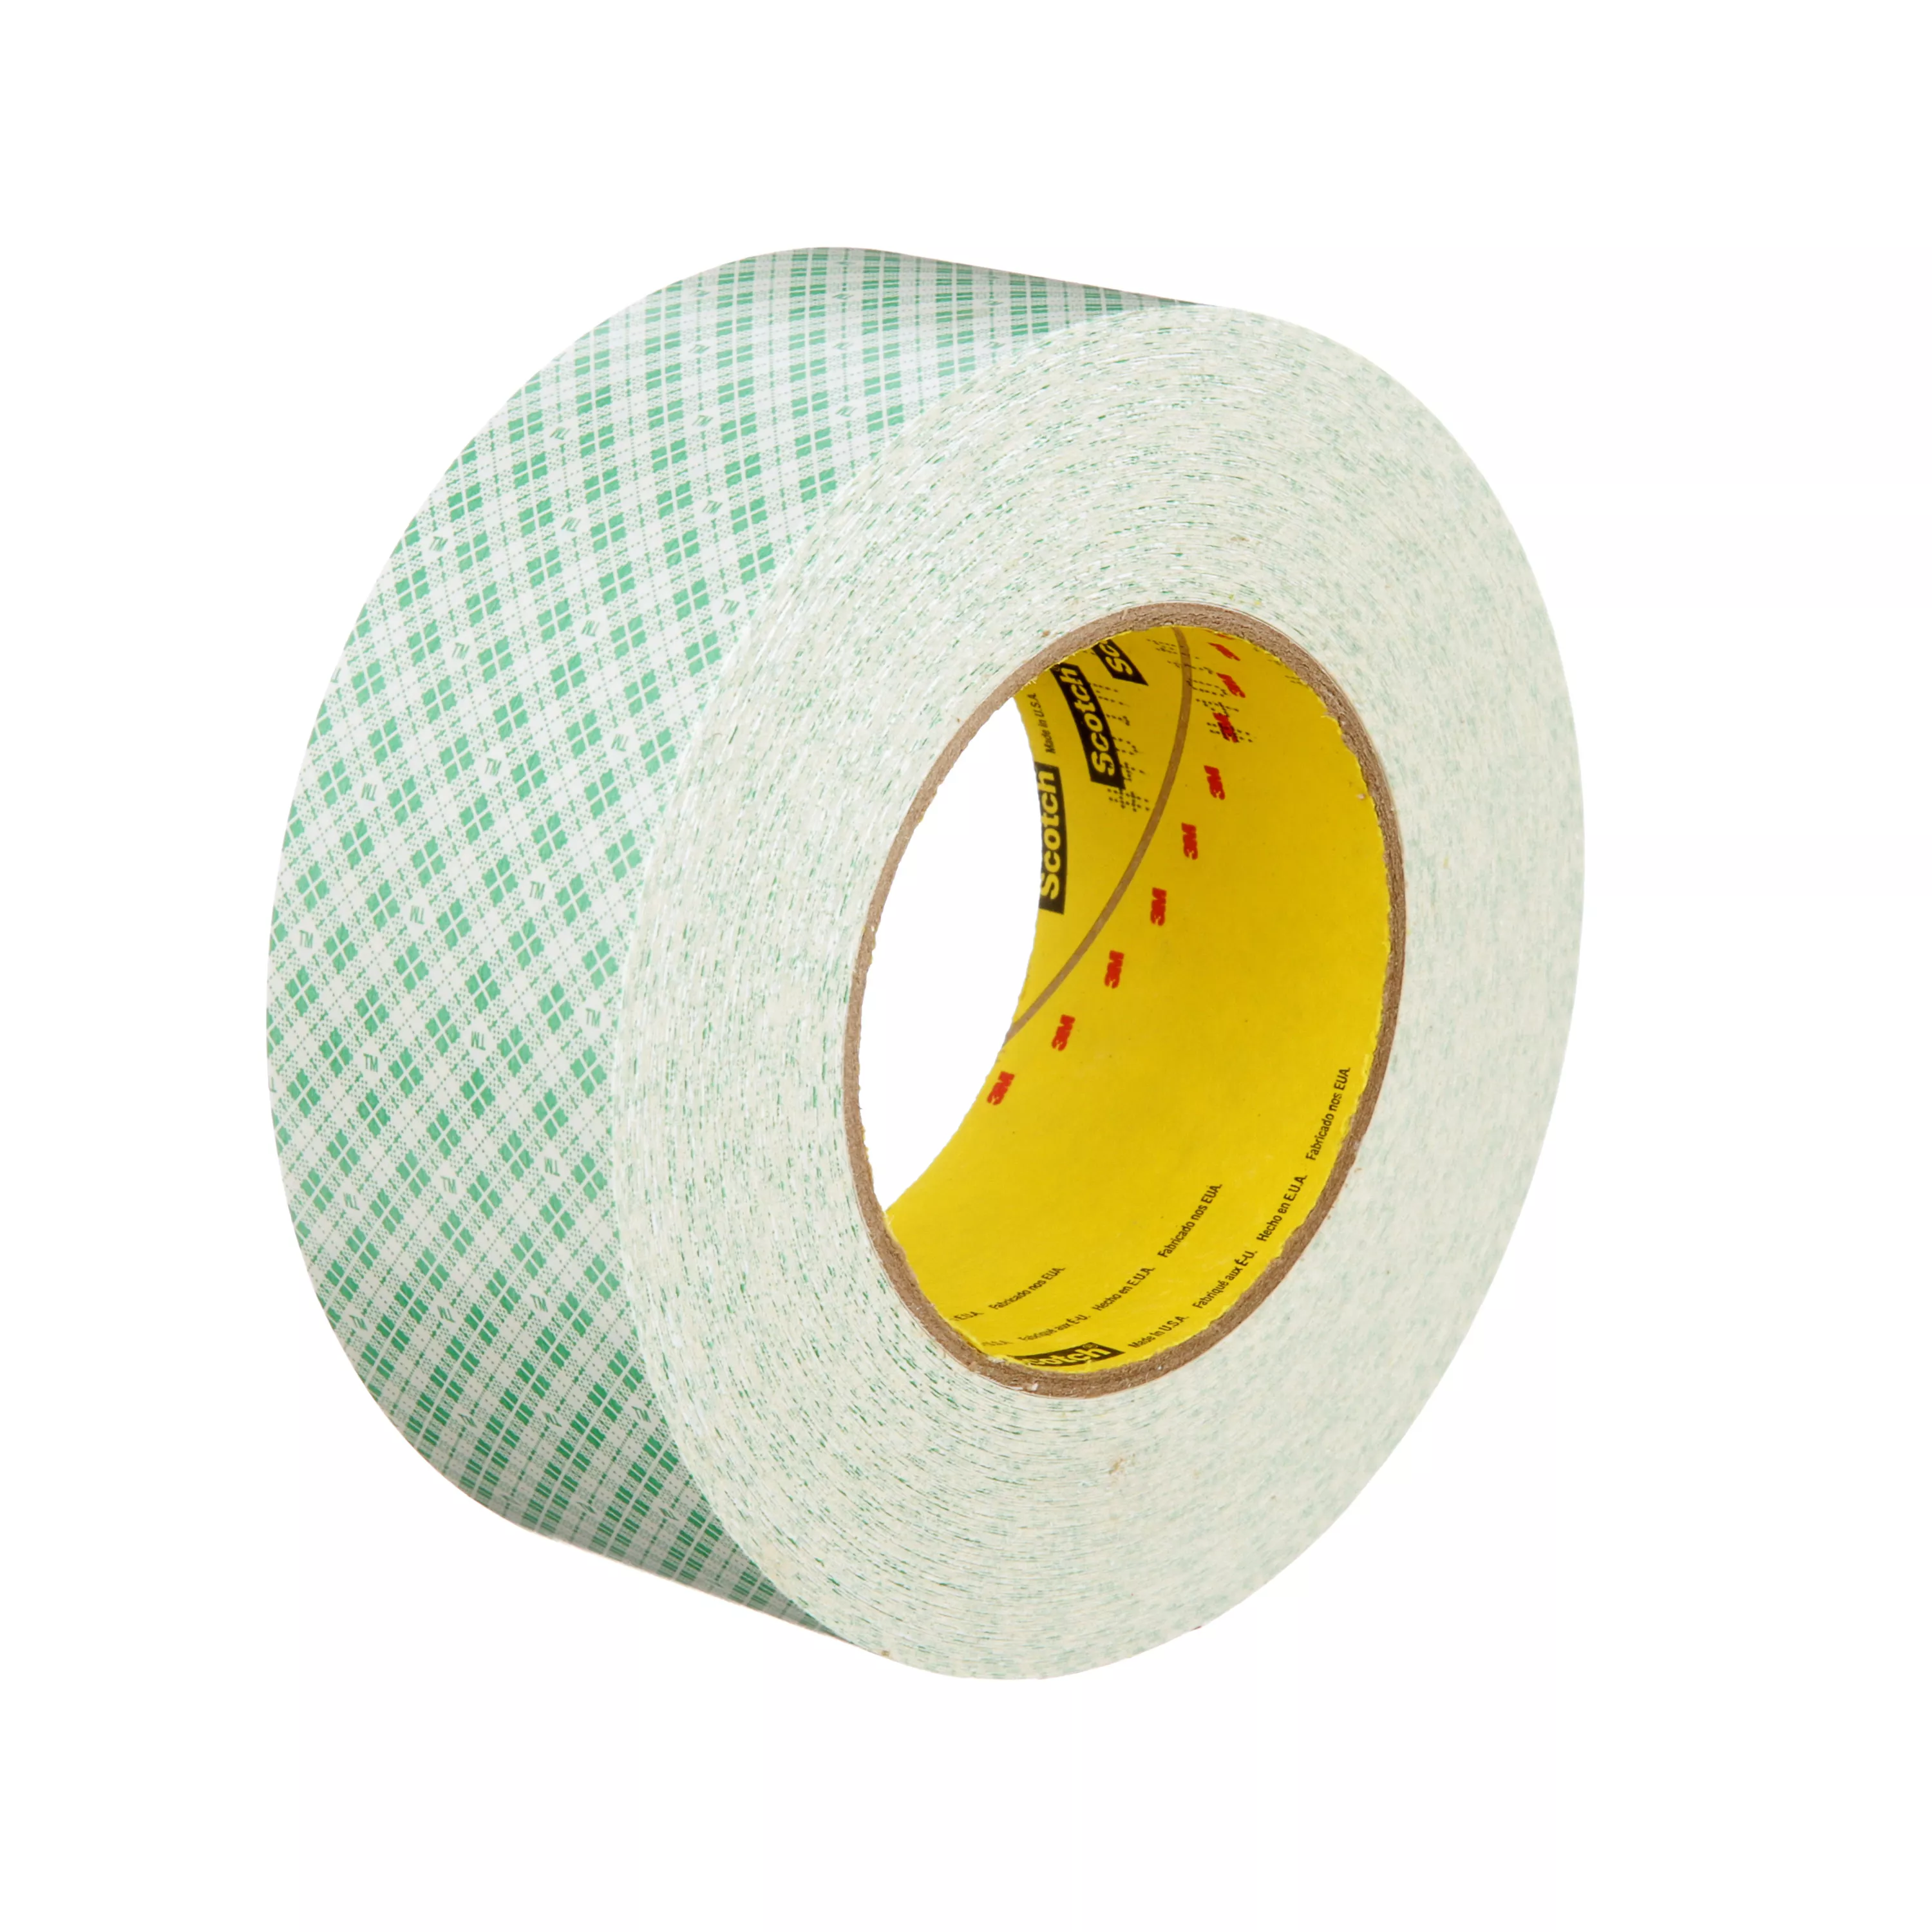 3M™ Double Coated Paper Tape 401M, Natural, 2 in x 36 yd, 9 mil, 24
Roll/Case